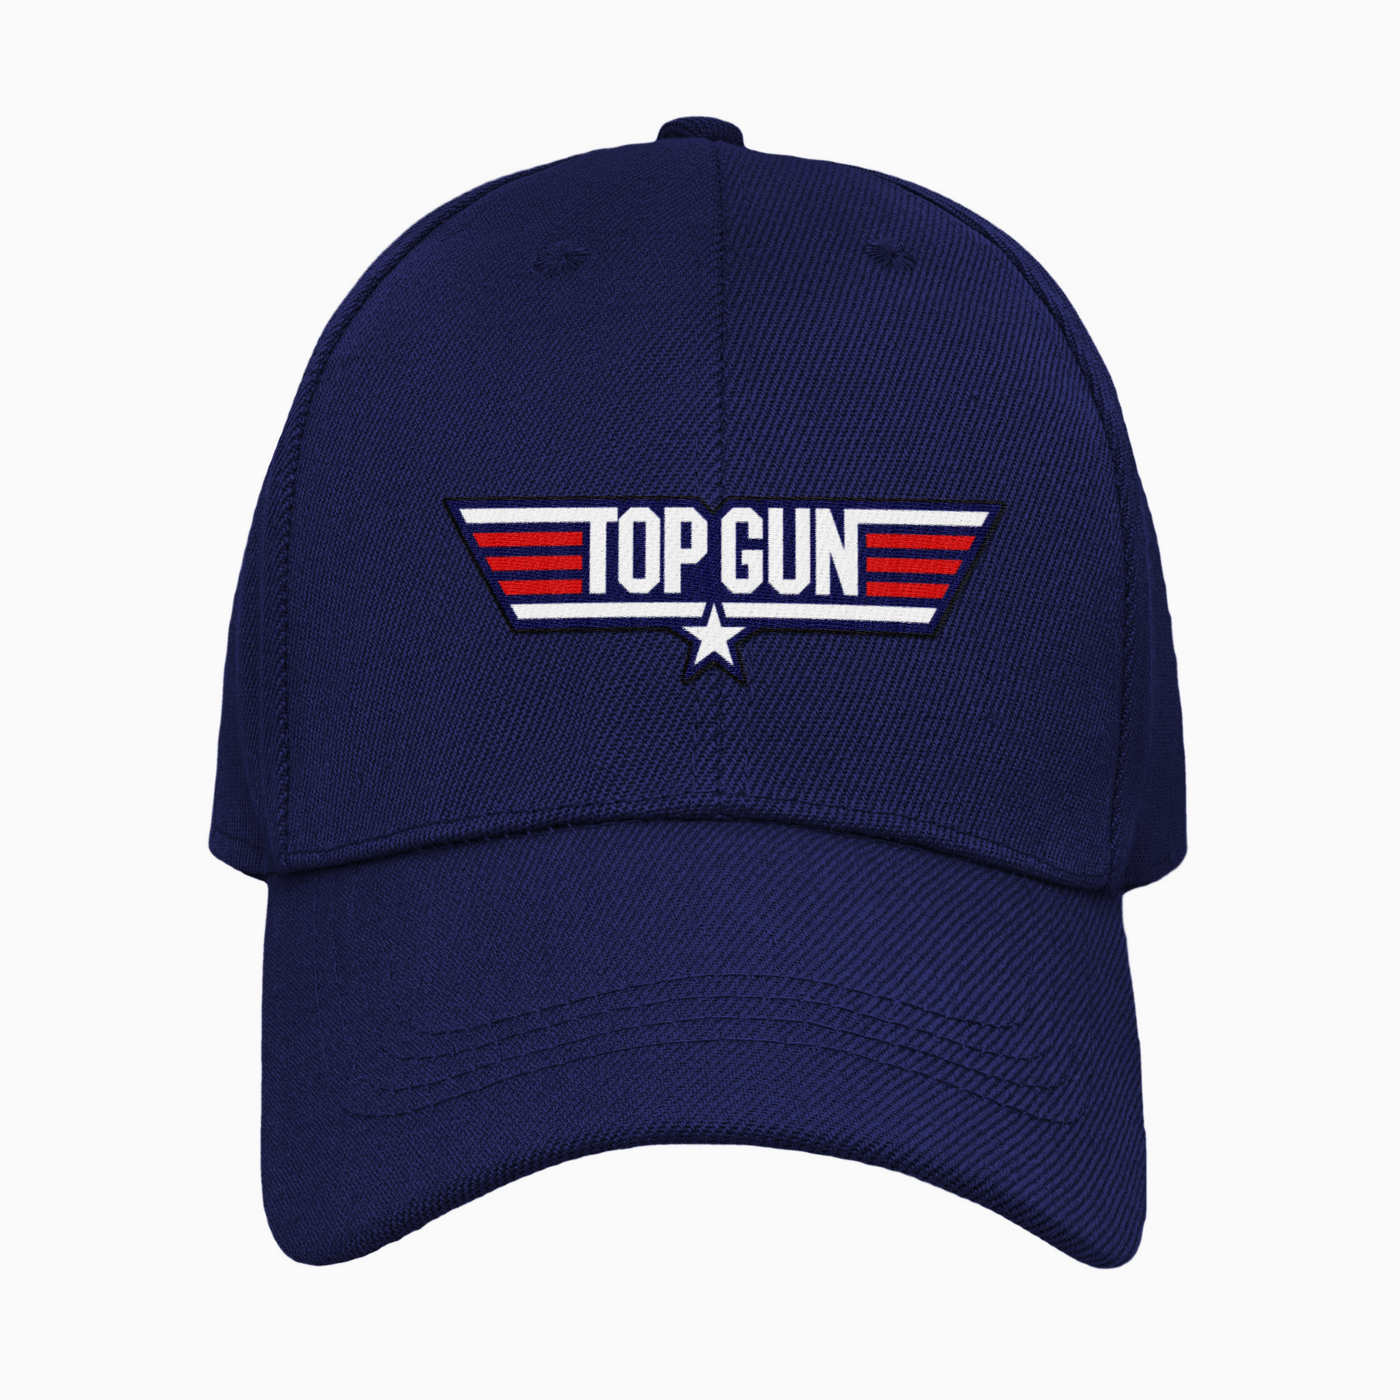 Best Unisex caps for Men and Women in India online, Bikers caps, Trucker caps, Baseball caps, Rugby caps,t shirts,jackets, patches, bandanas,helmet liners,badges,hoodies for riders and fashion forward